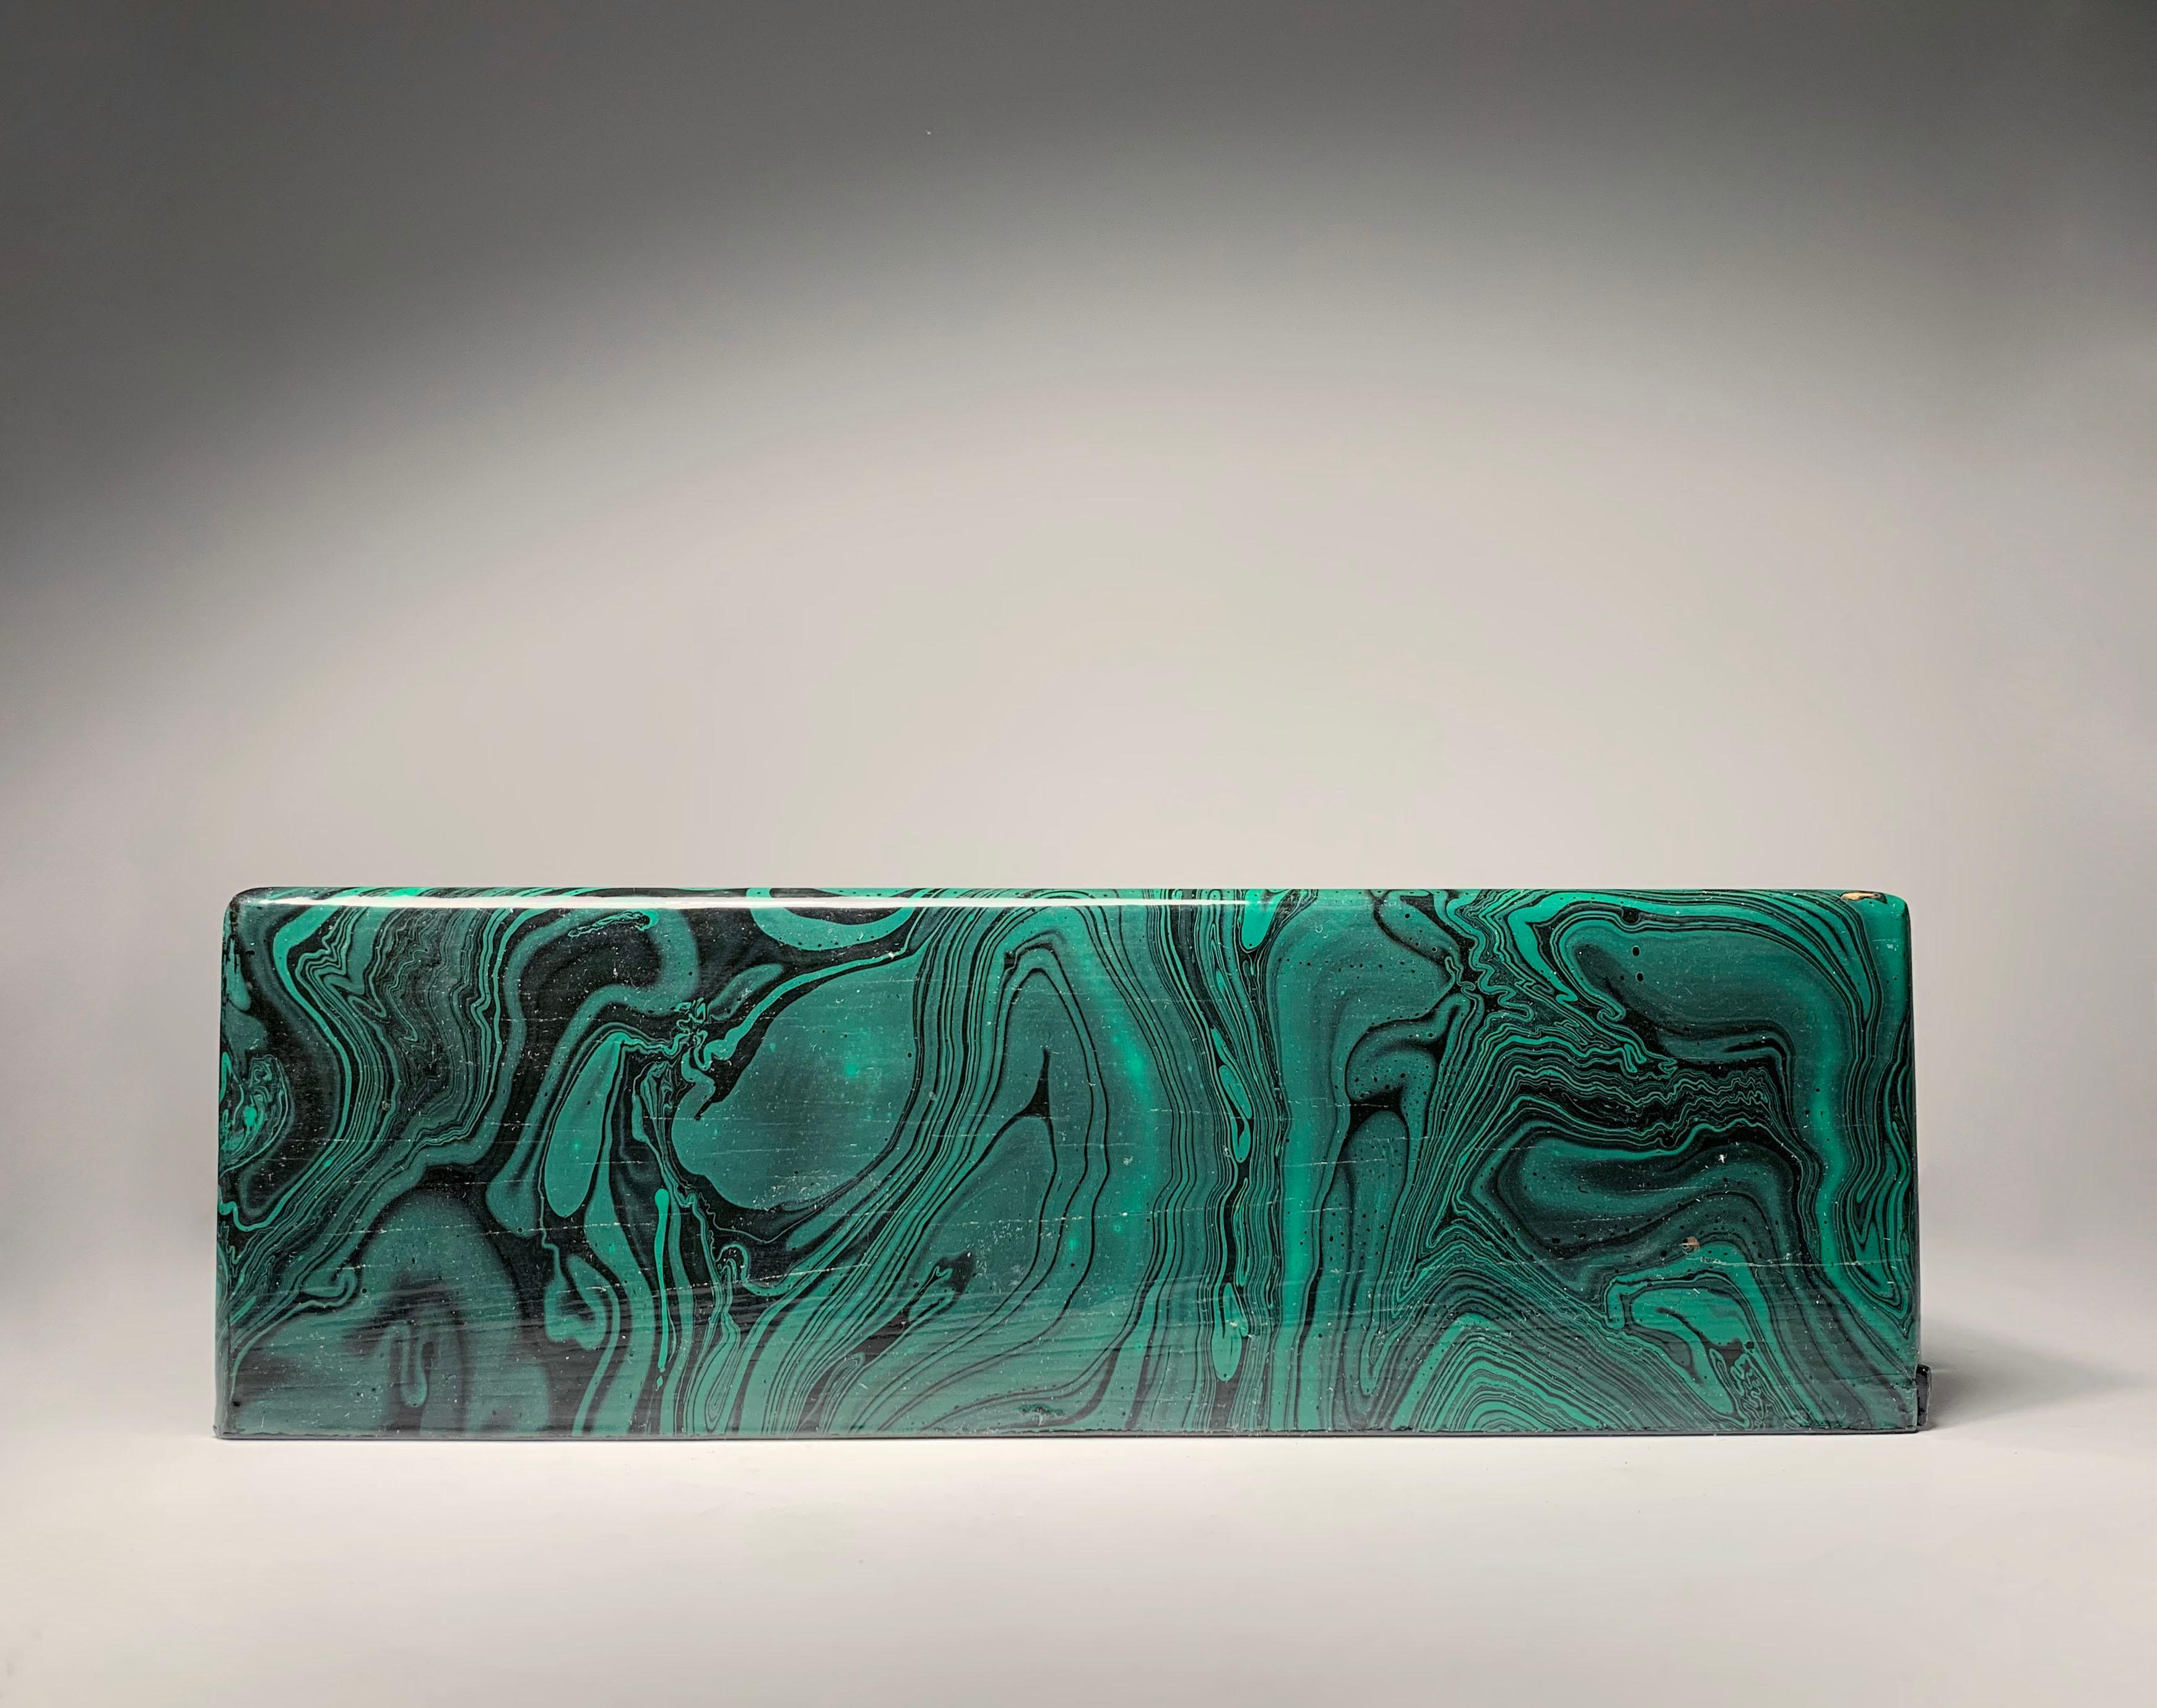 A nice Vintage Handcrafted/Painted Faux Malachite Tissue Box. Much in the manner of Fornasetti. Uncertain of the designer/company that made these. Possibly Italian in origin.

Some minor wear as shown. Overall quite nice. We can touch up the couple